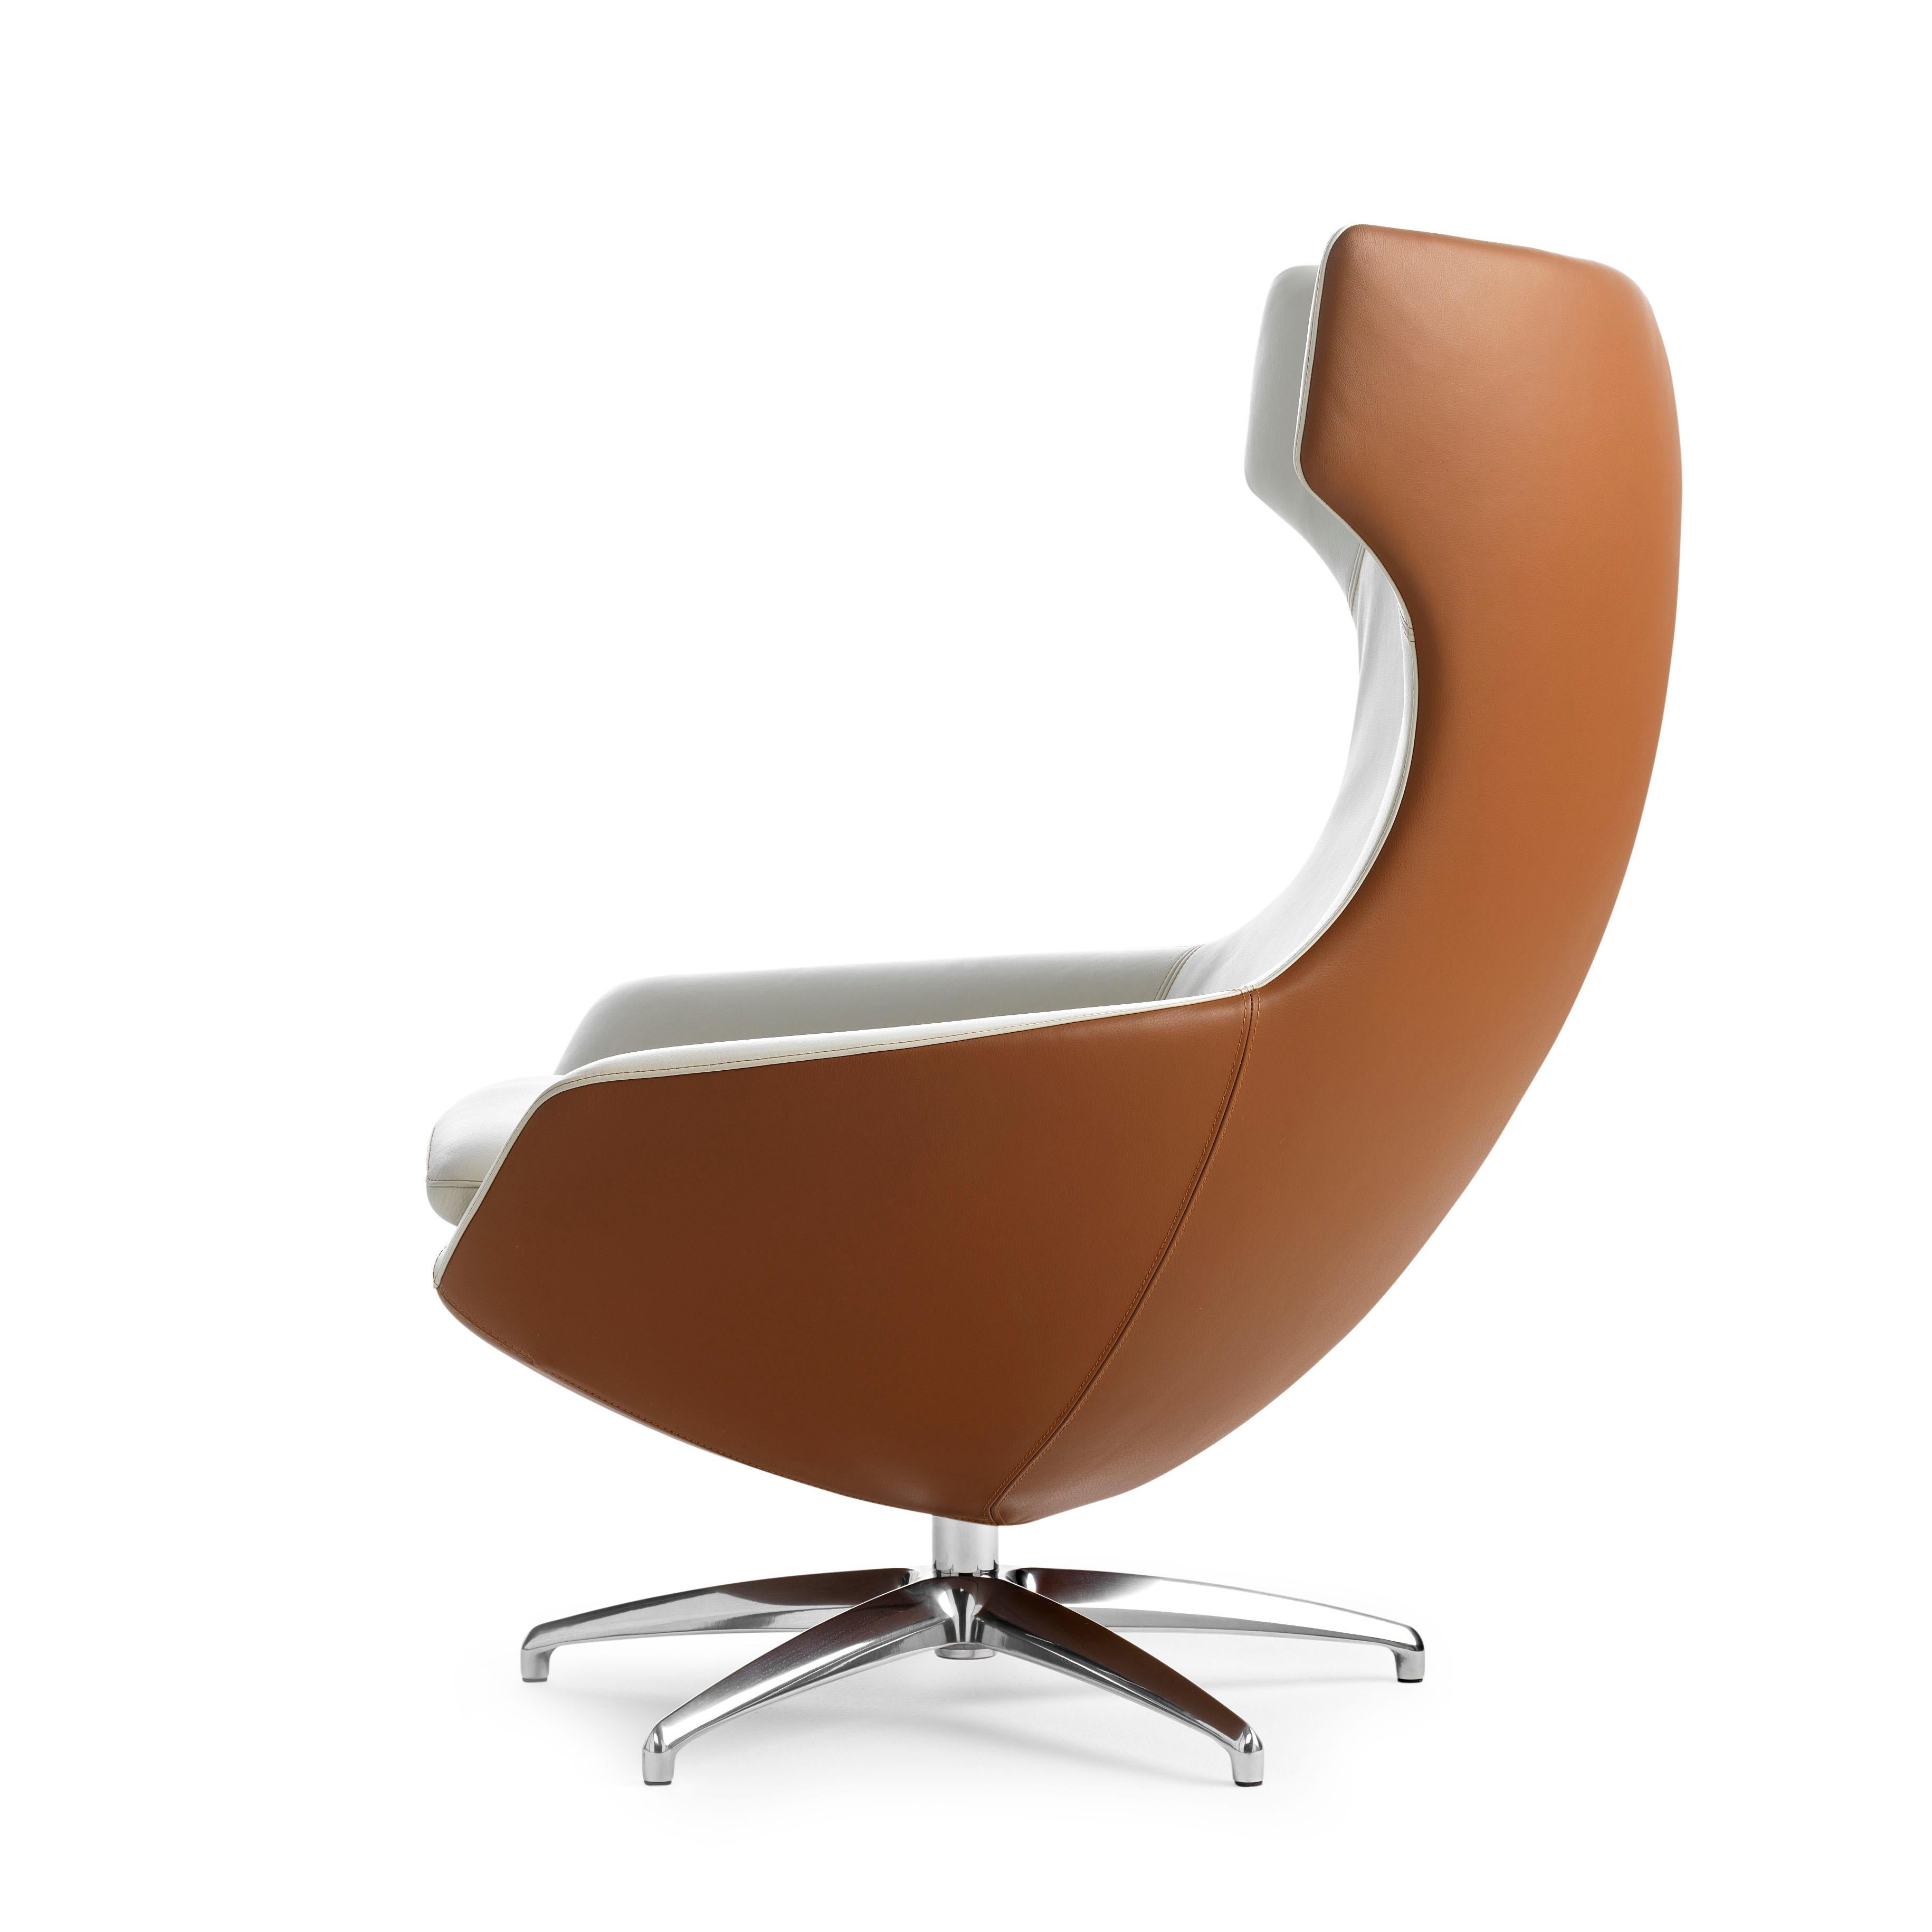 The stylish combination of comfort and design makes Caruzzo perfect for use in contemporary spaces and also won the famous Red Dot Design Award. The ergonomically-shaped swivel armchair with high back and the ‘ears’ at both sides, offer the highest